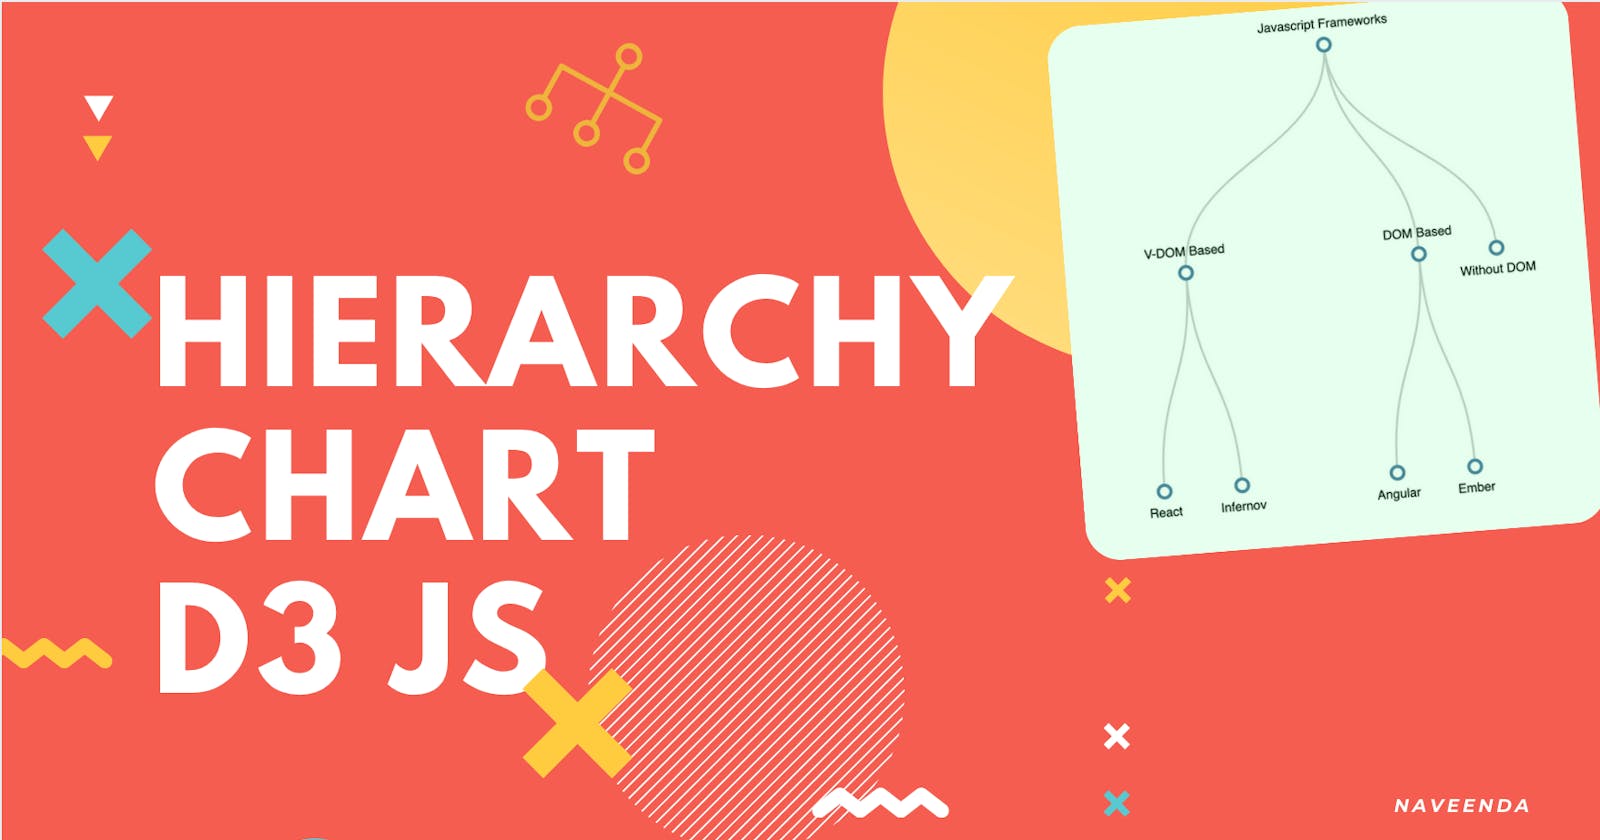 How to create a simple hierarchy chart in d3 js